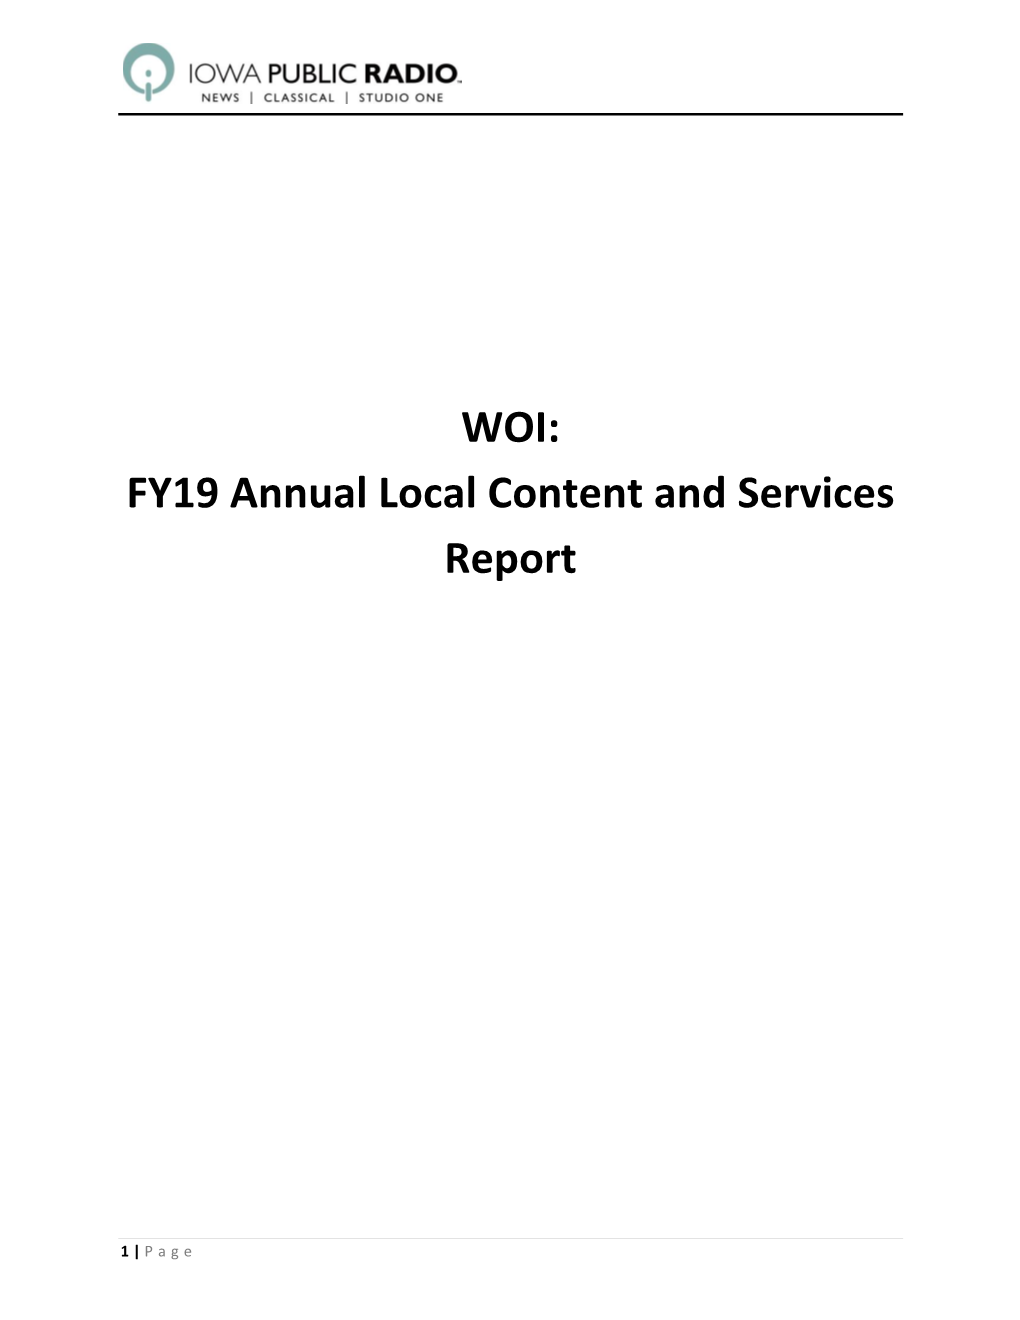 WOI: FY19 Annual Local Content and Services Report